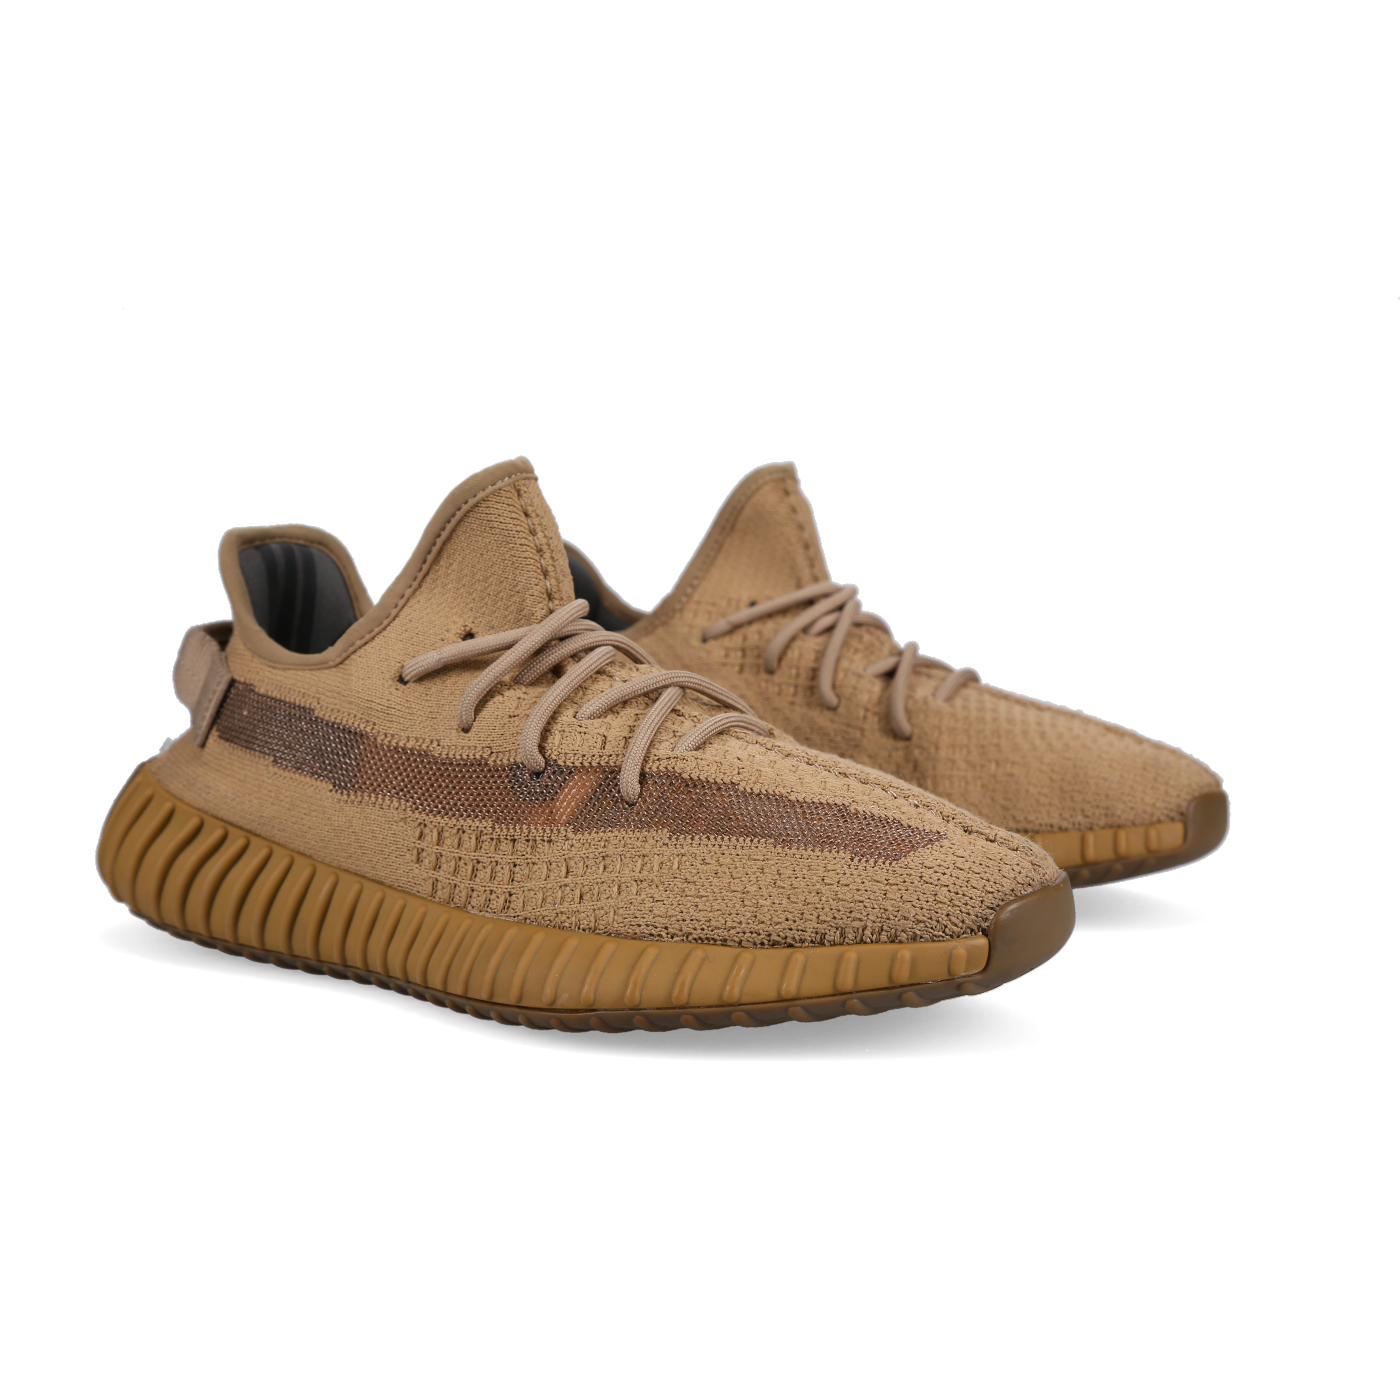 Adidas Yeezy Boost 350 V2 'Earth' - Front View